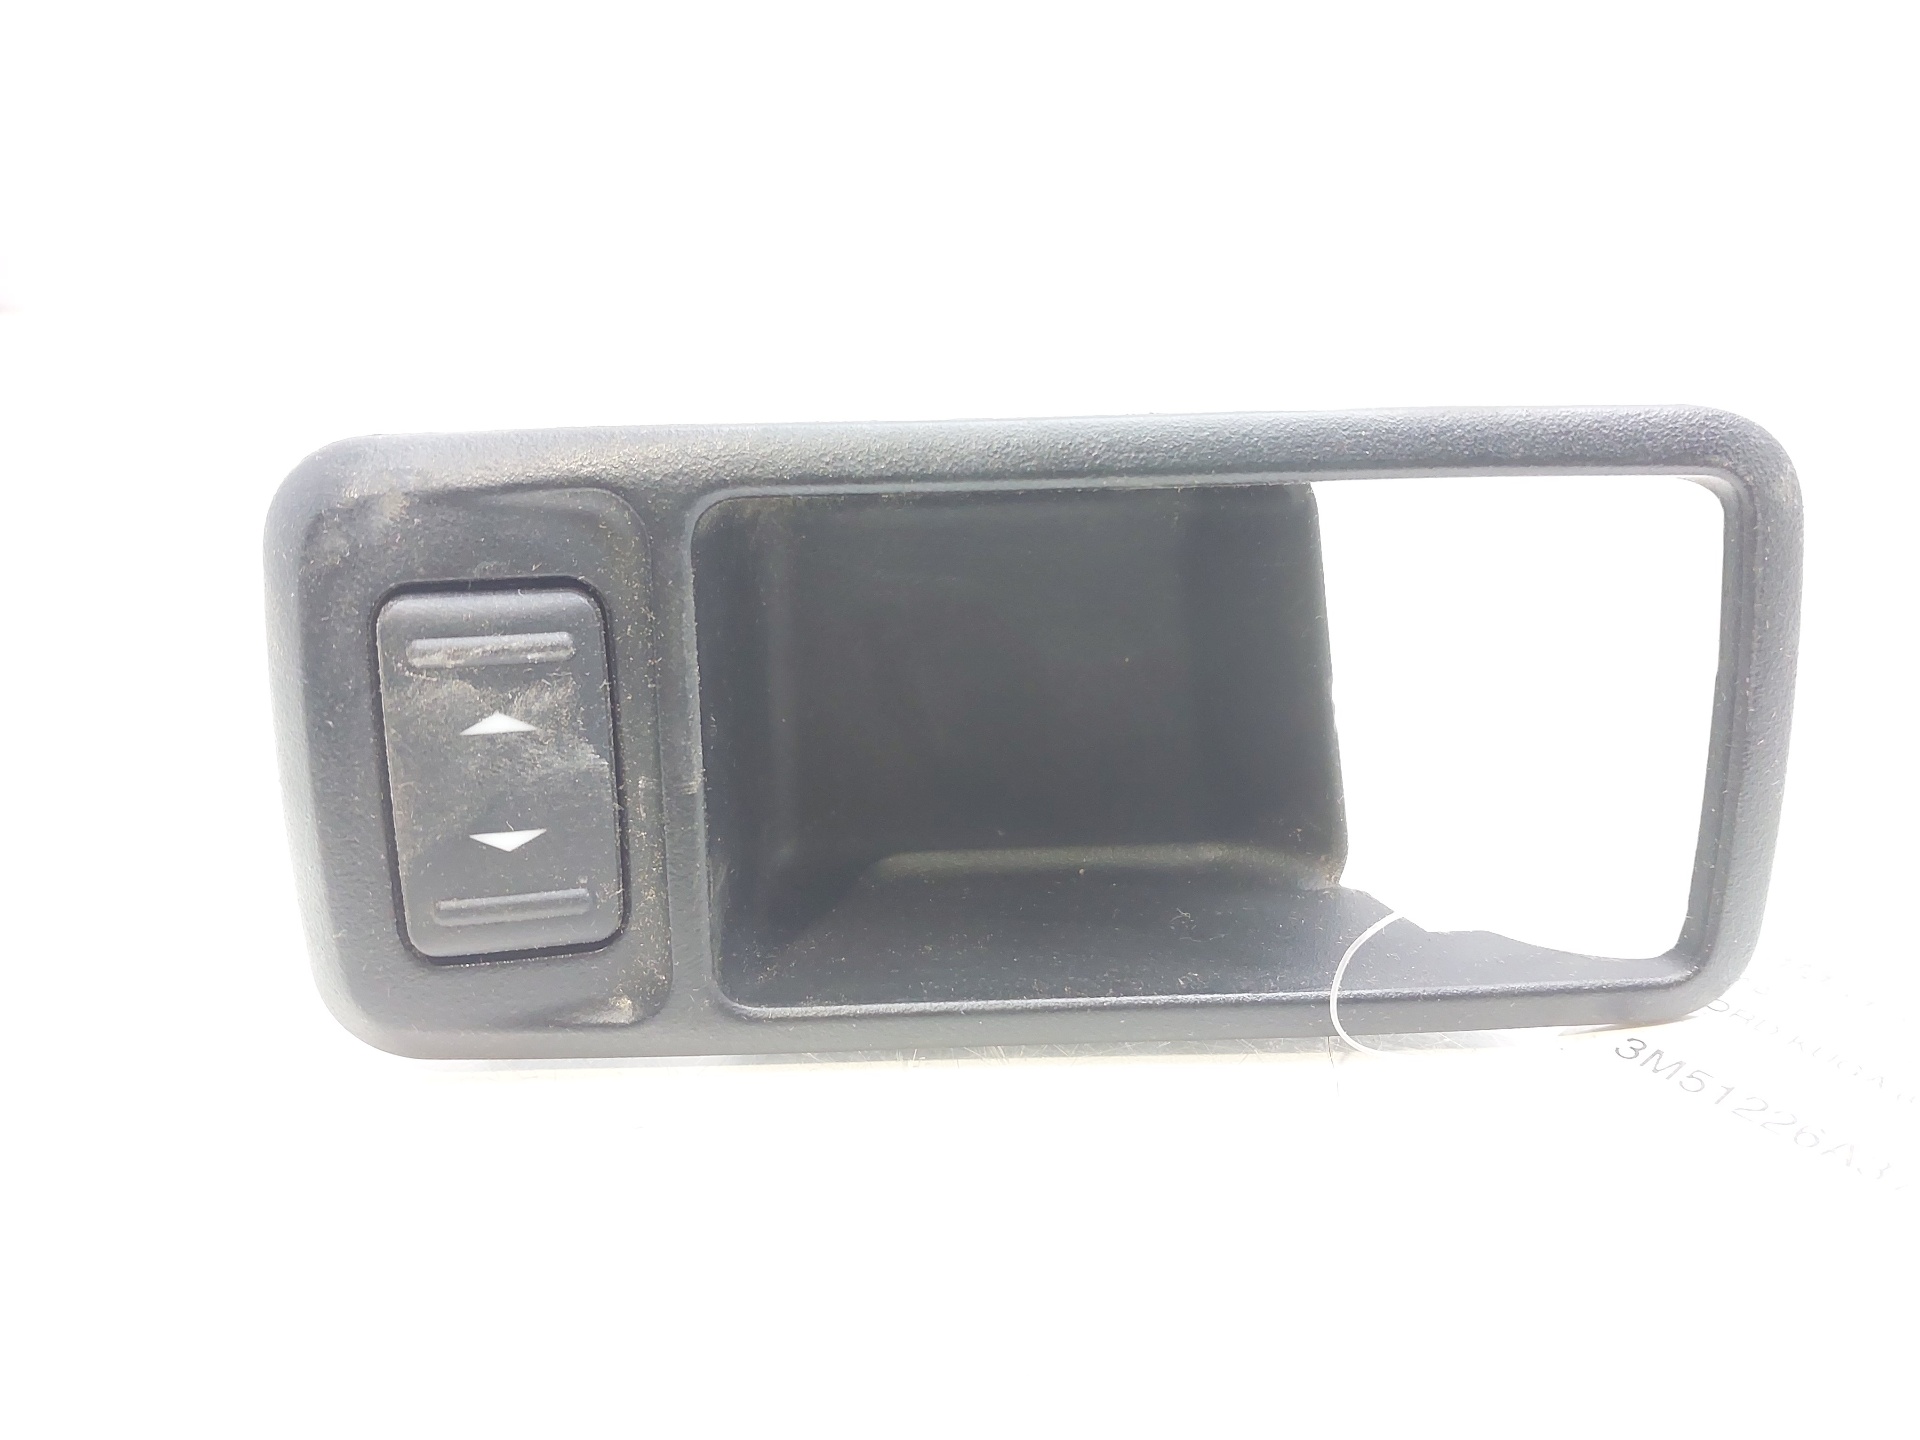 FORD Kuga 2 generation (2013-2020) Rear Right Door Window Control Switch 3M51226A37 22556773